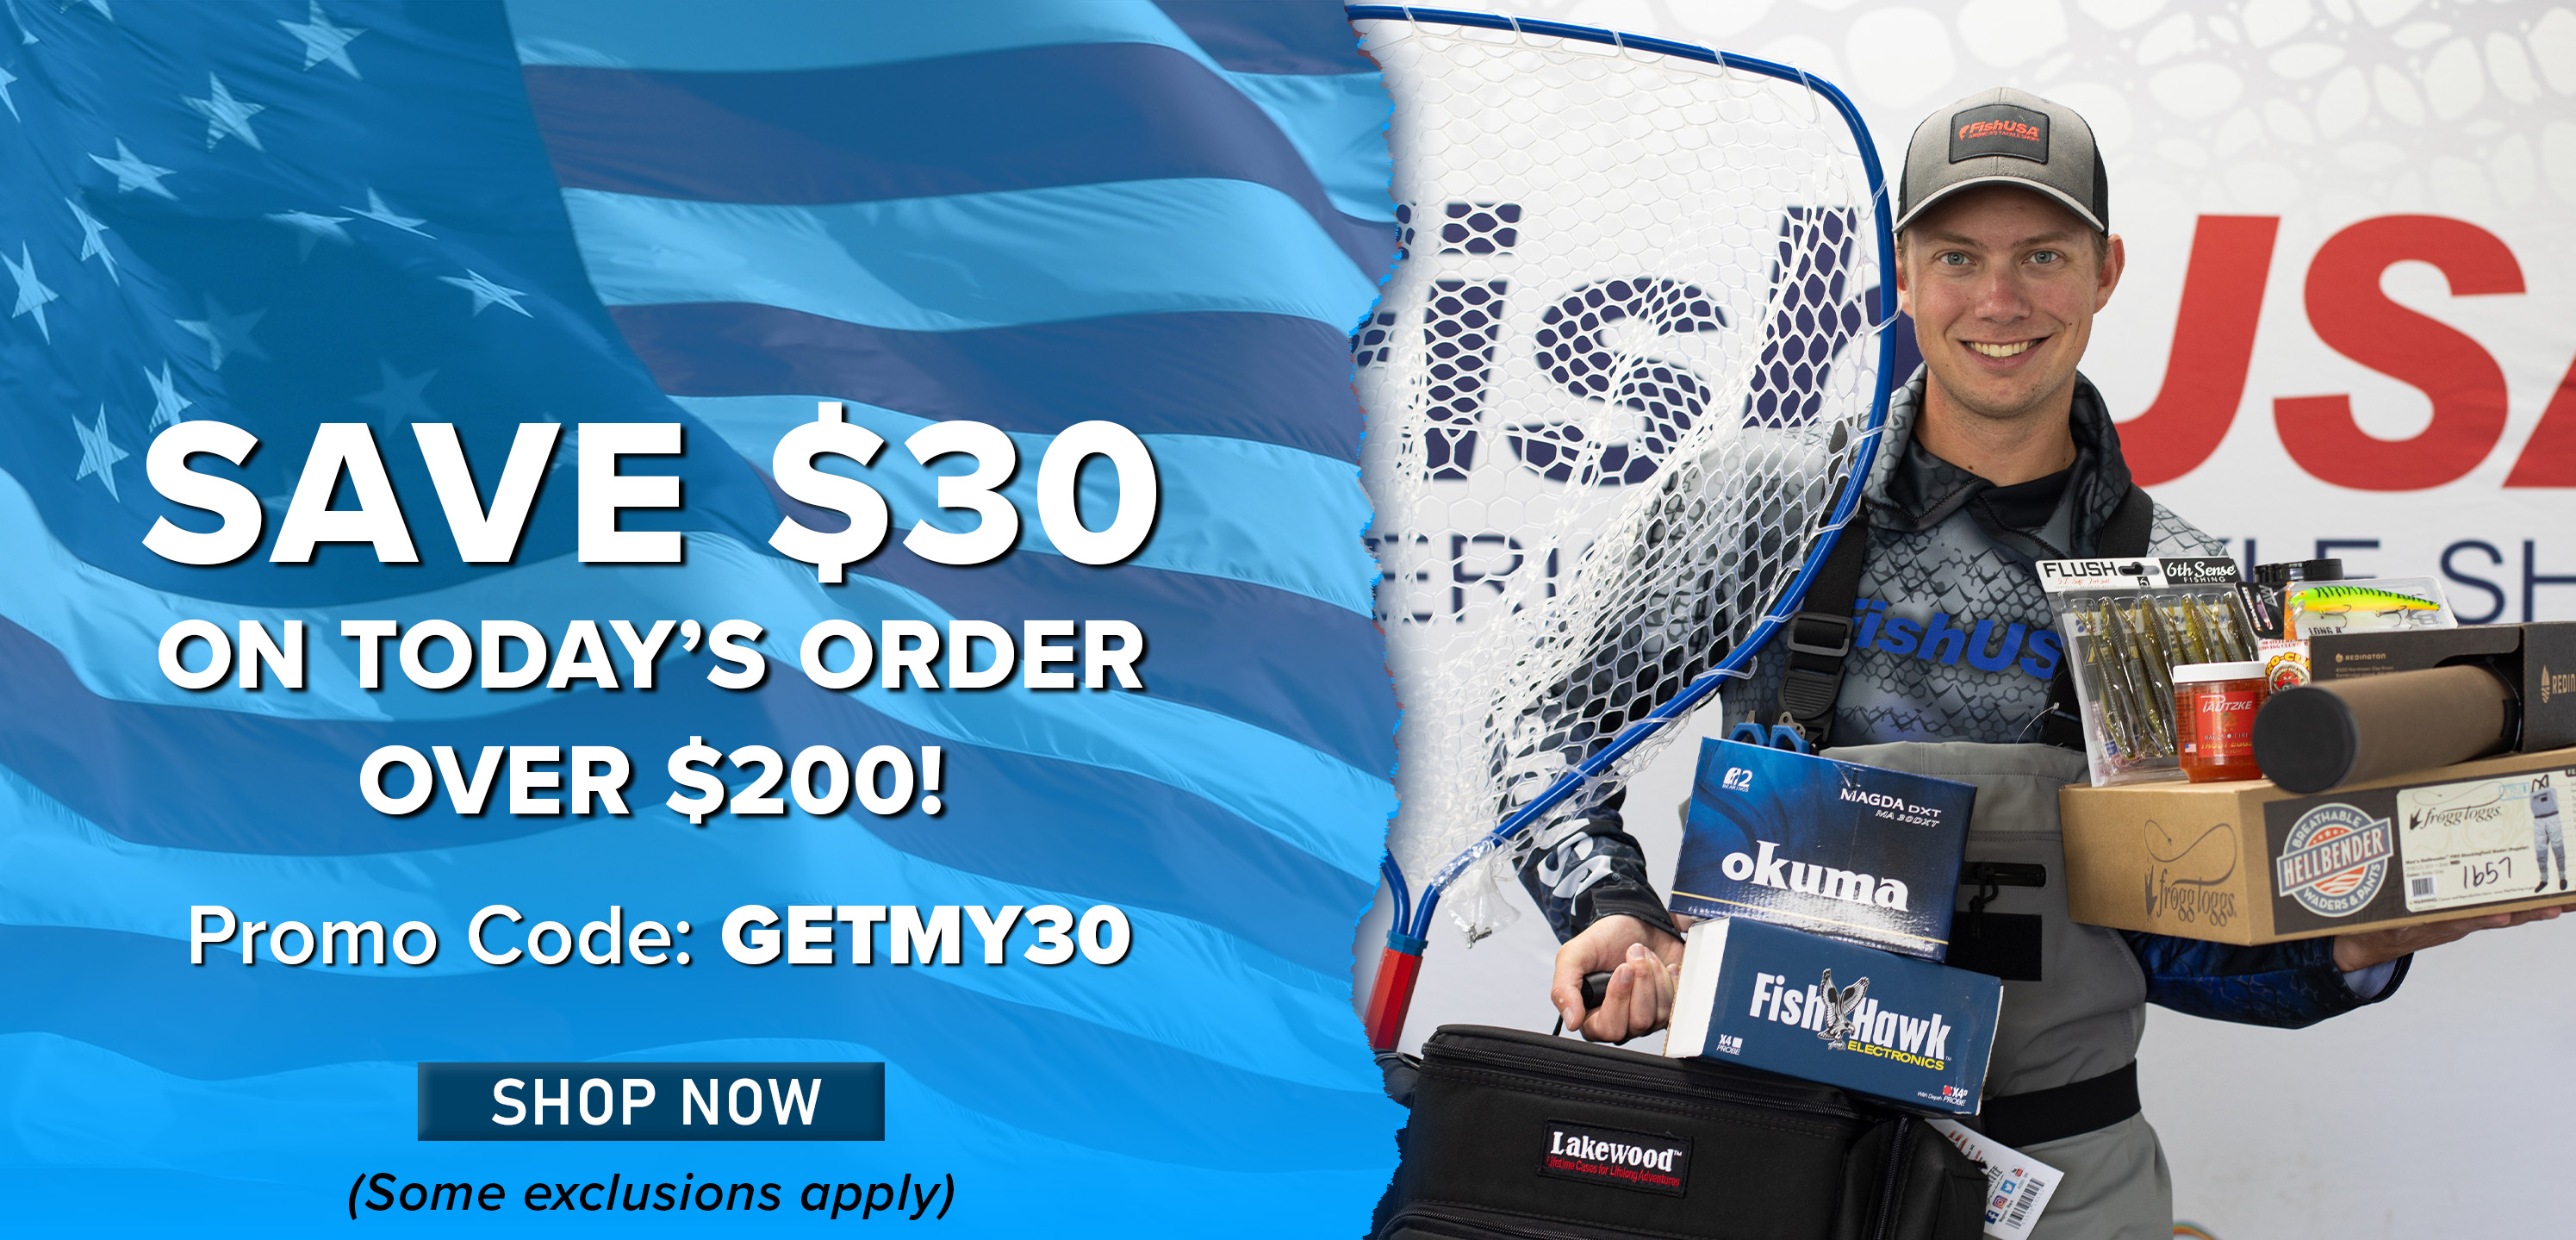 Save $30 On Today's Order Over $200! Promo Code: GETMY30 Shop Now (Some exclusions apply.)